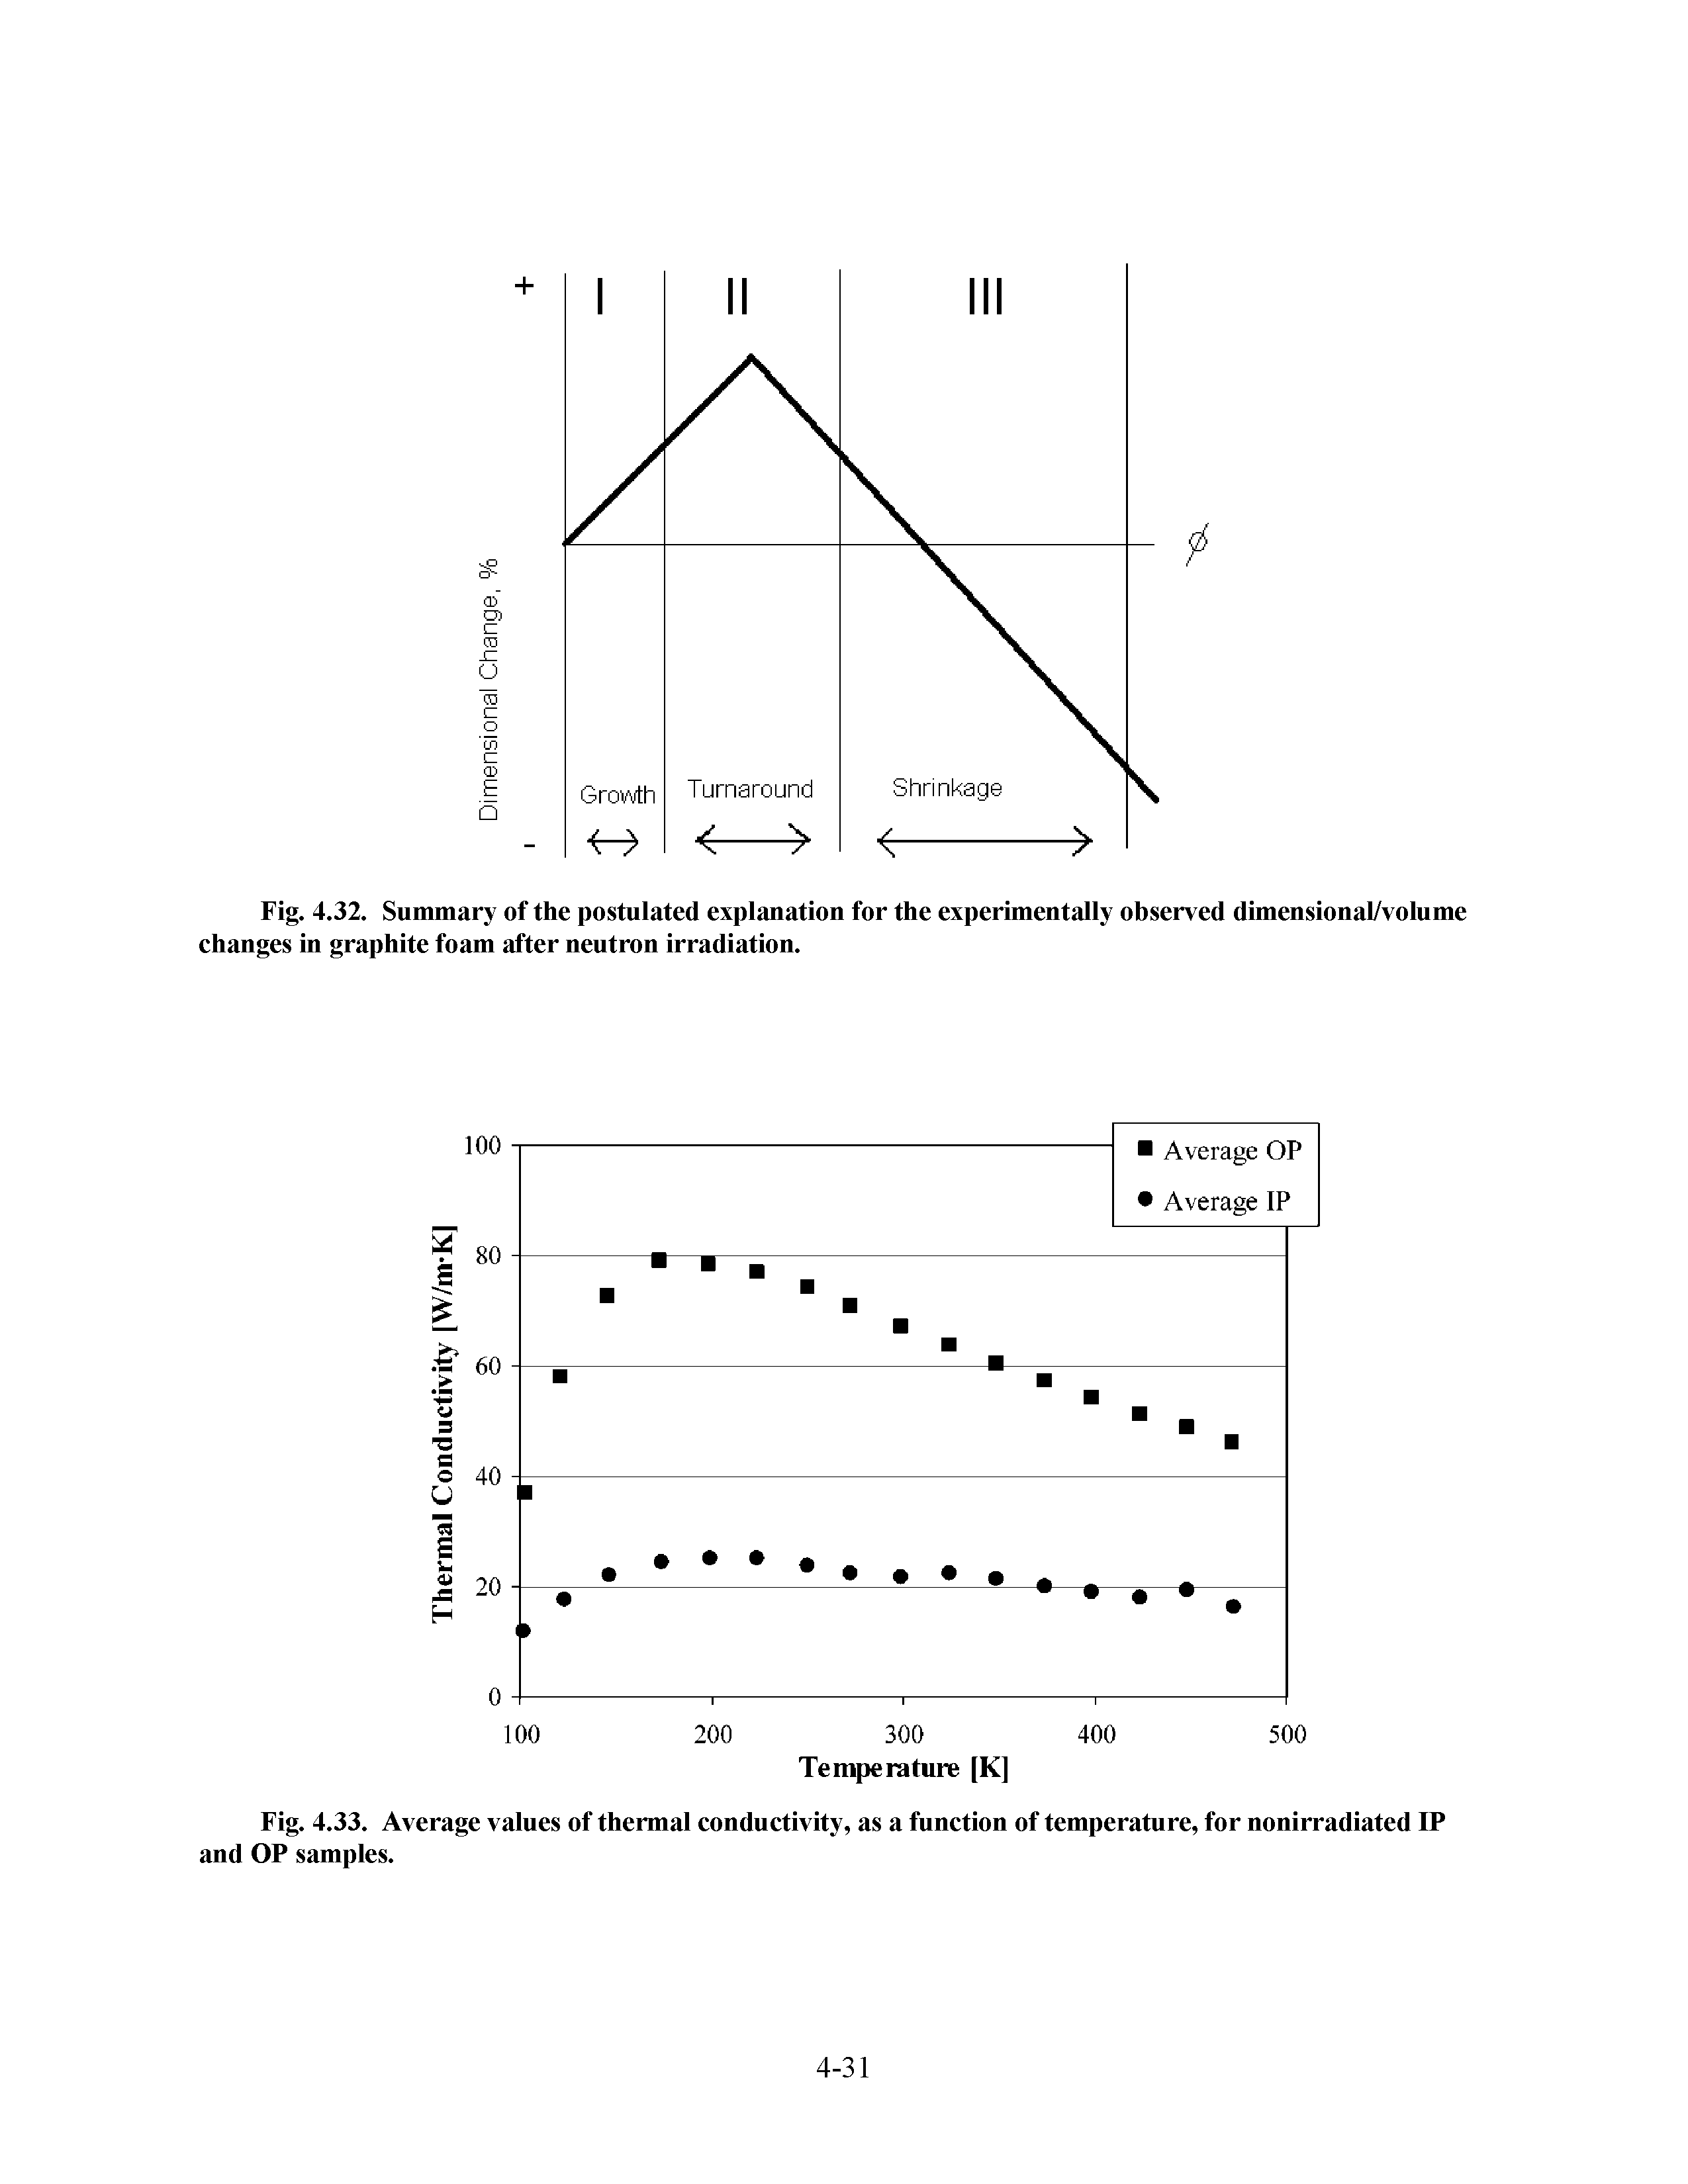 Fig. 4.32. Summary of the postulated explanation for the experimentally observed dimensional/volume changes in graphite foam after neutron irradiation.